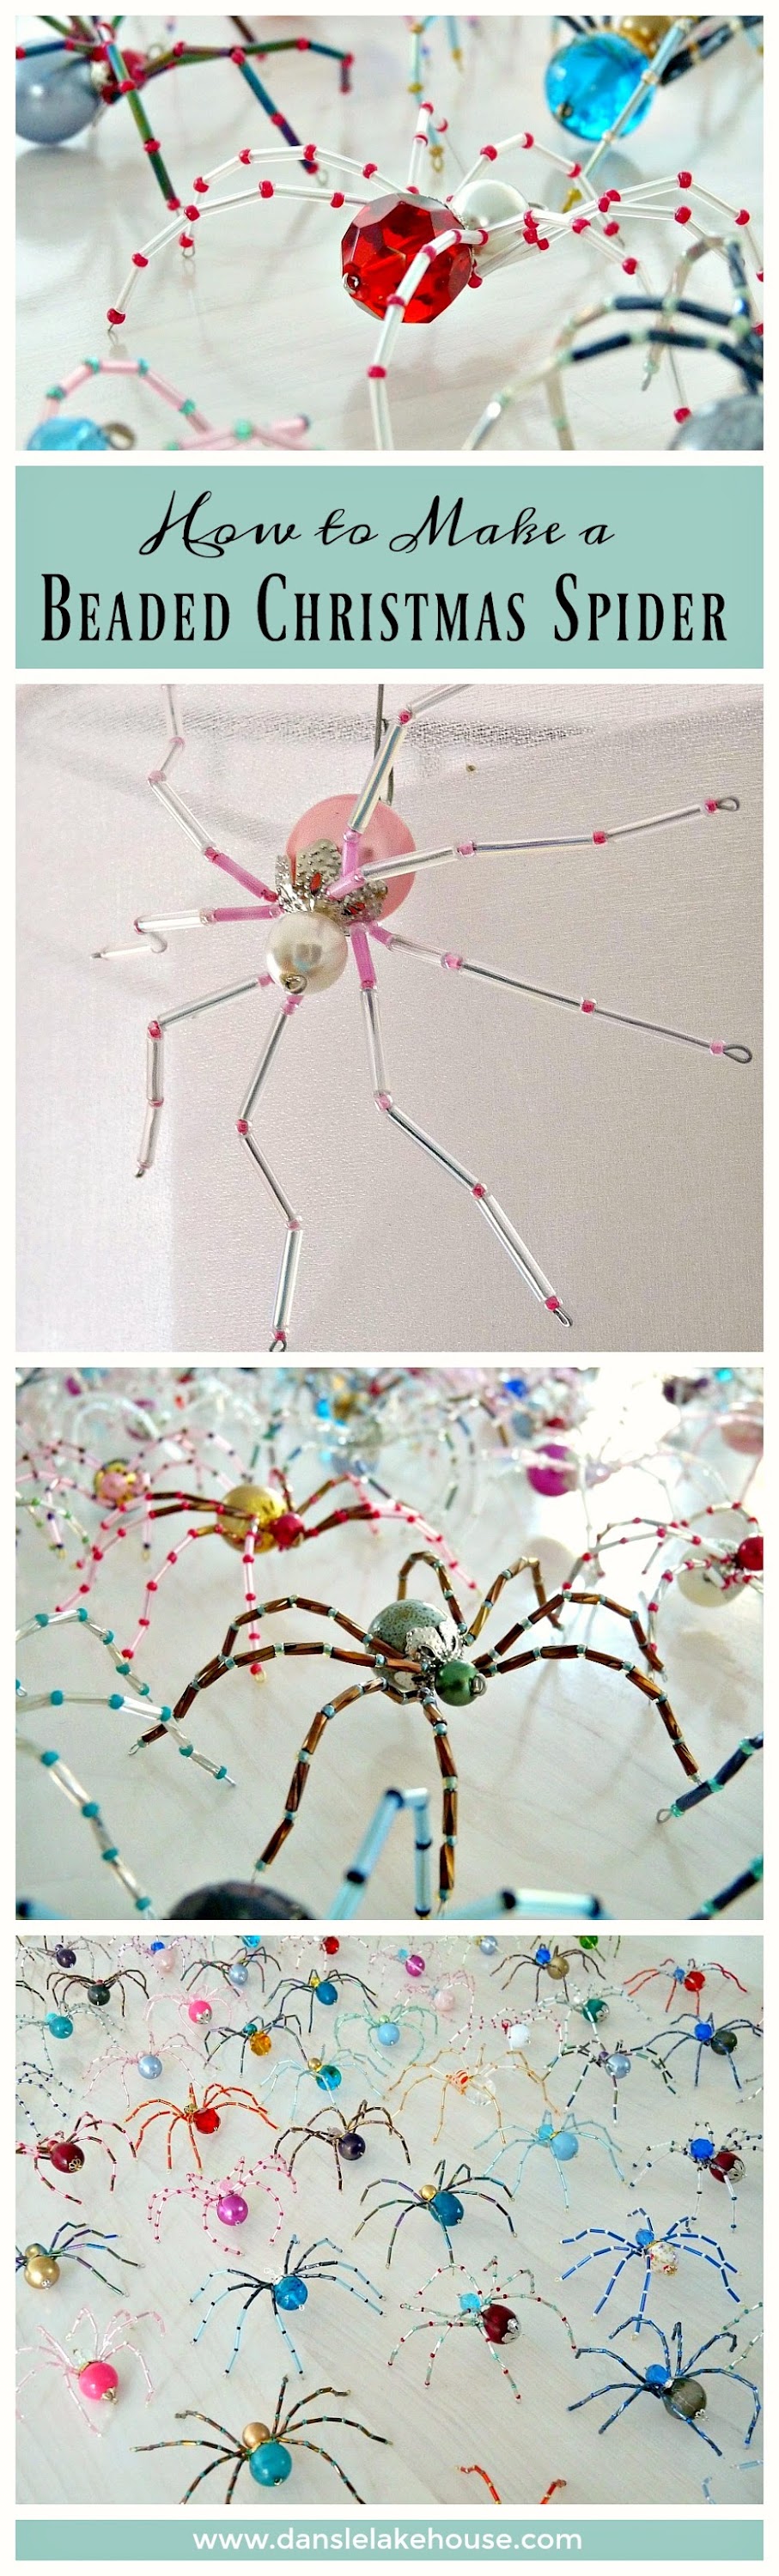 How to make a beaded christmas spider